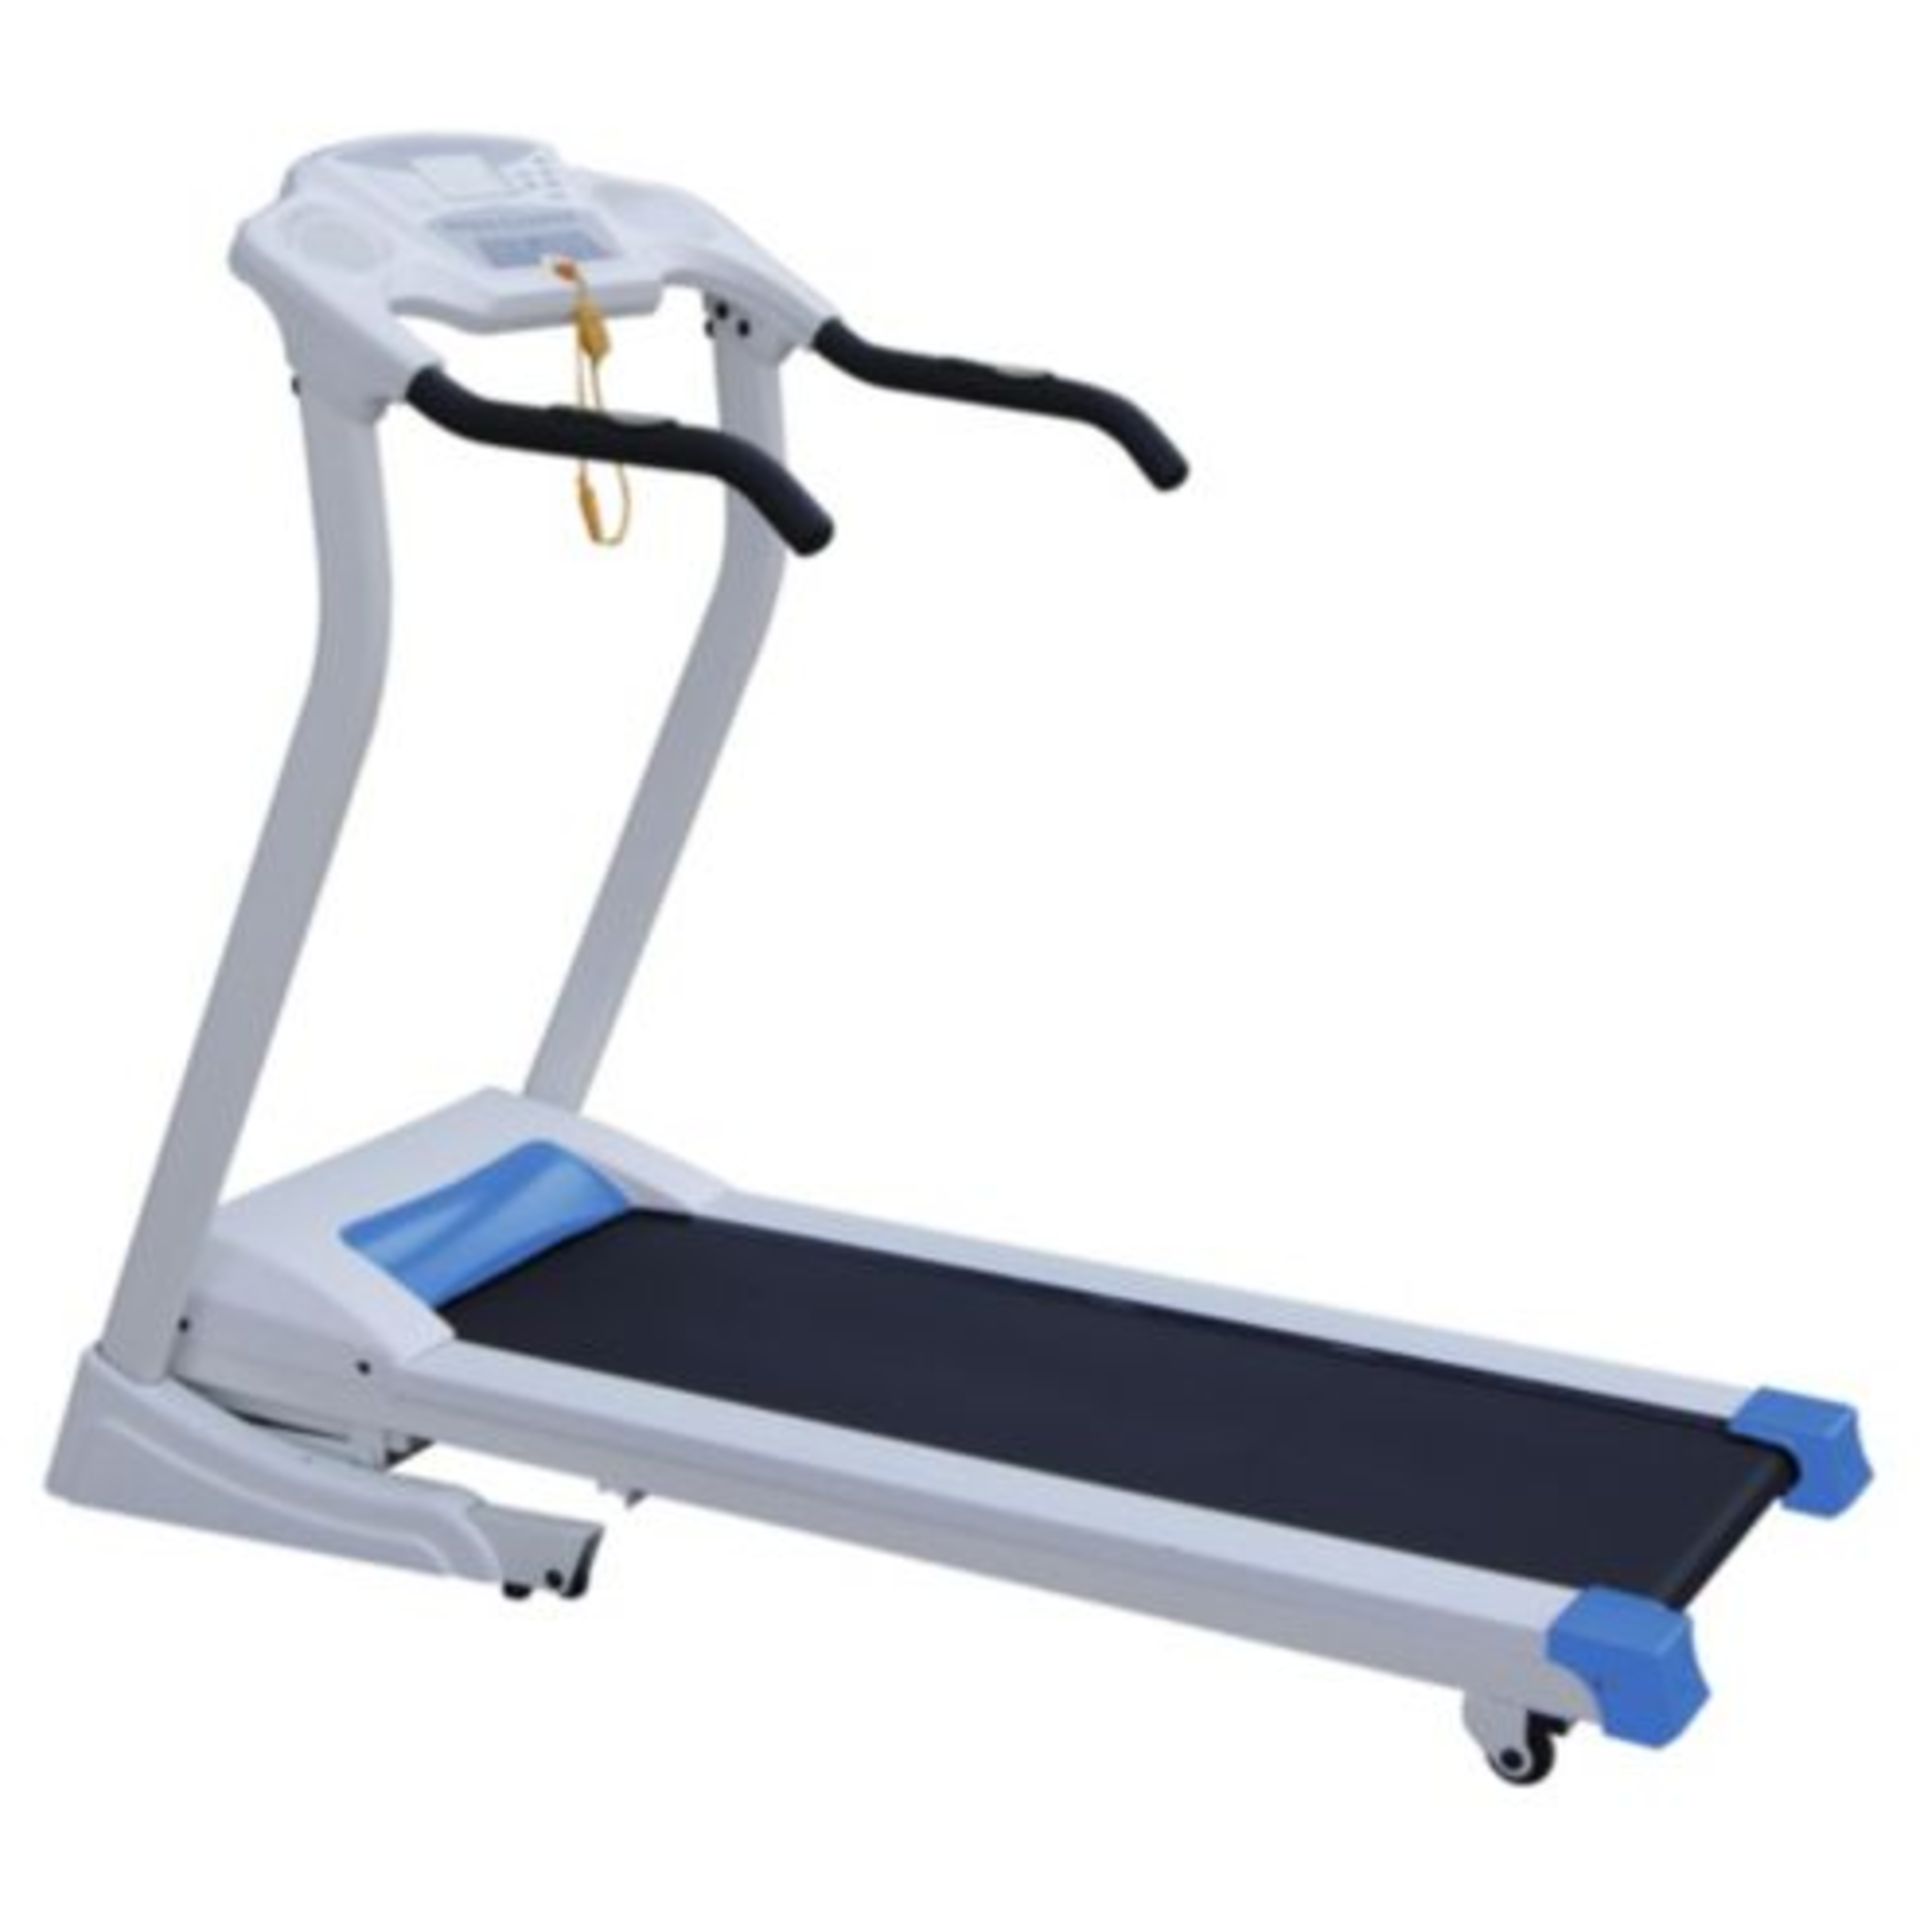 V Brand New Motorised Treadmill with 1.5hp Motor - Shock Absorbing Deck - LCD Monitor Displaying - Image 3 of 3